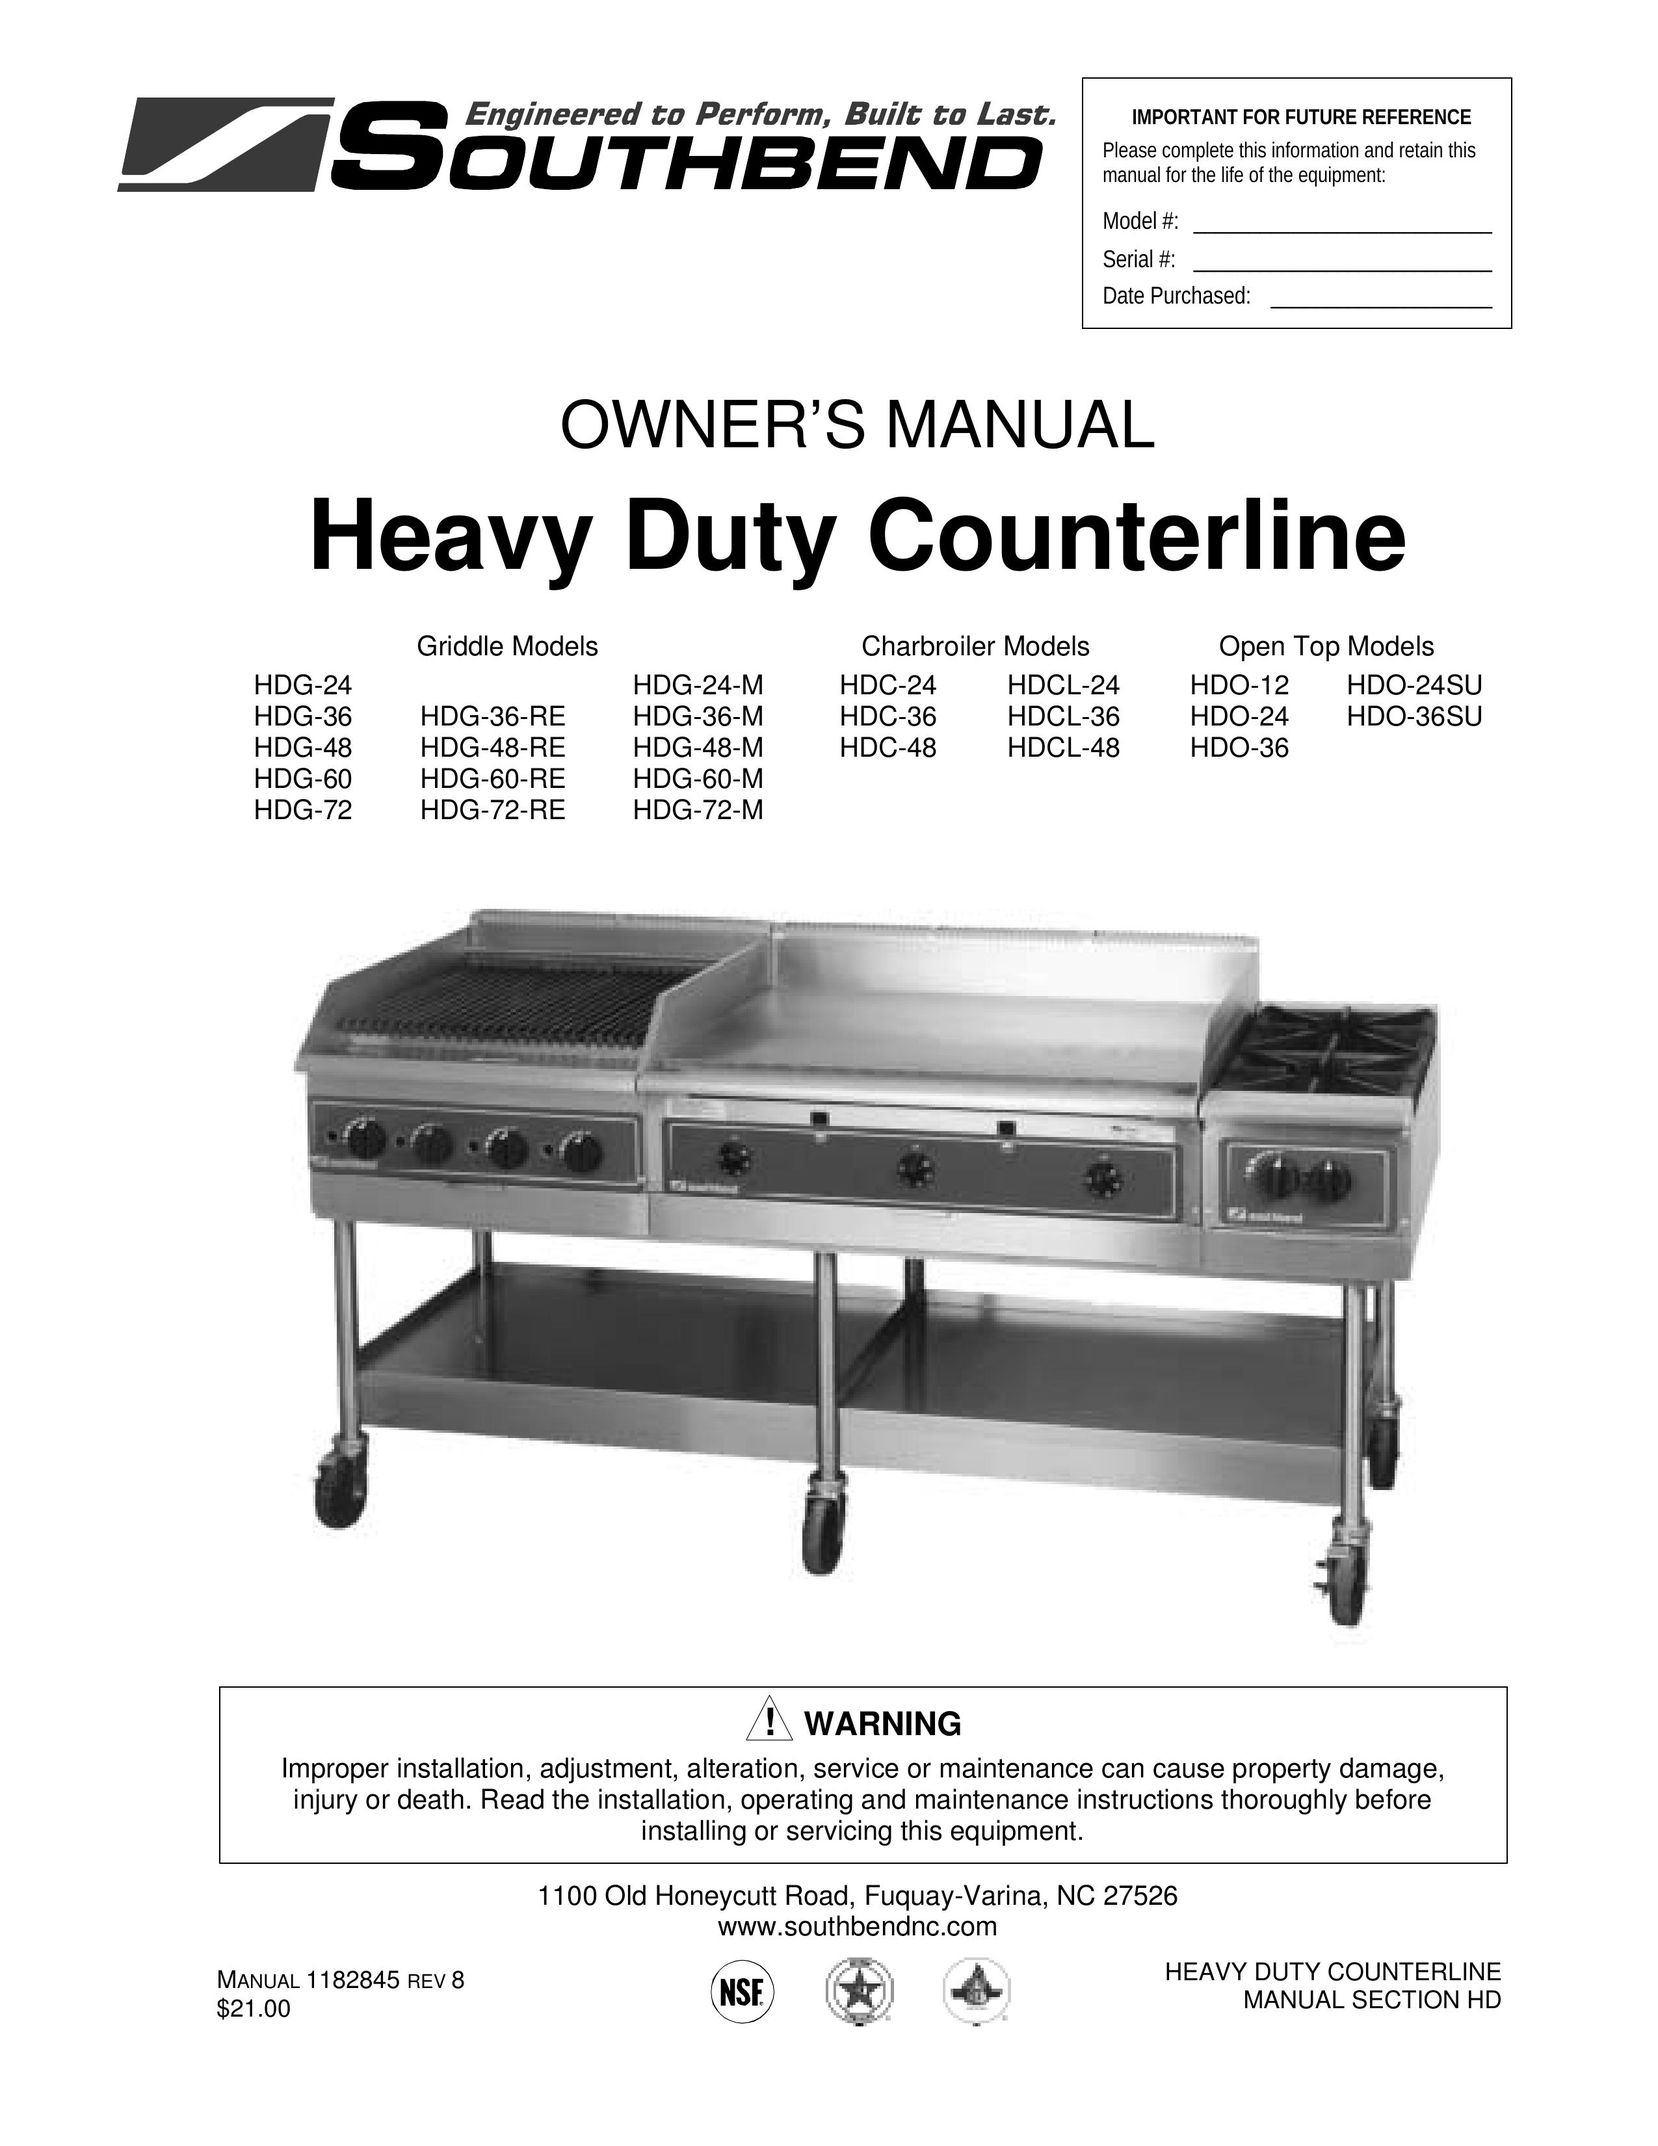 Southbend HDG-60-RE Griddle User Manual